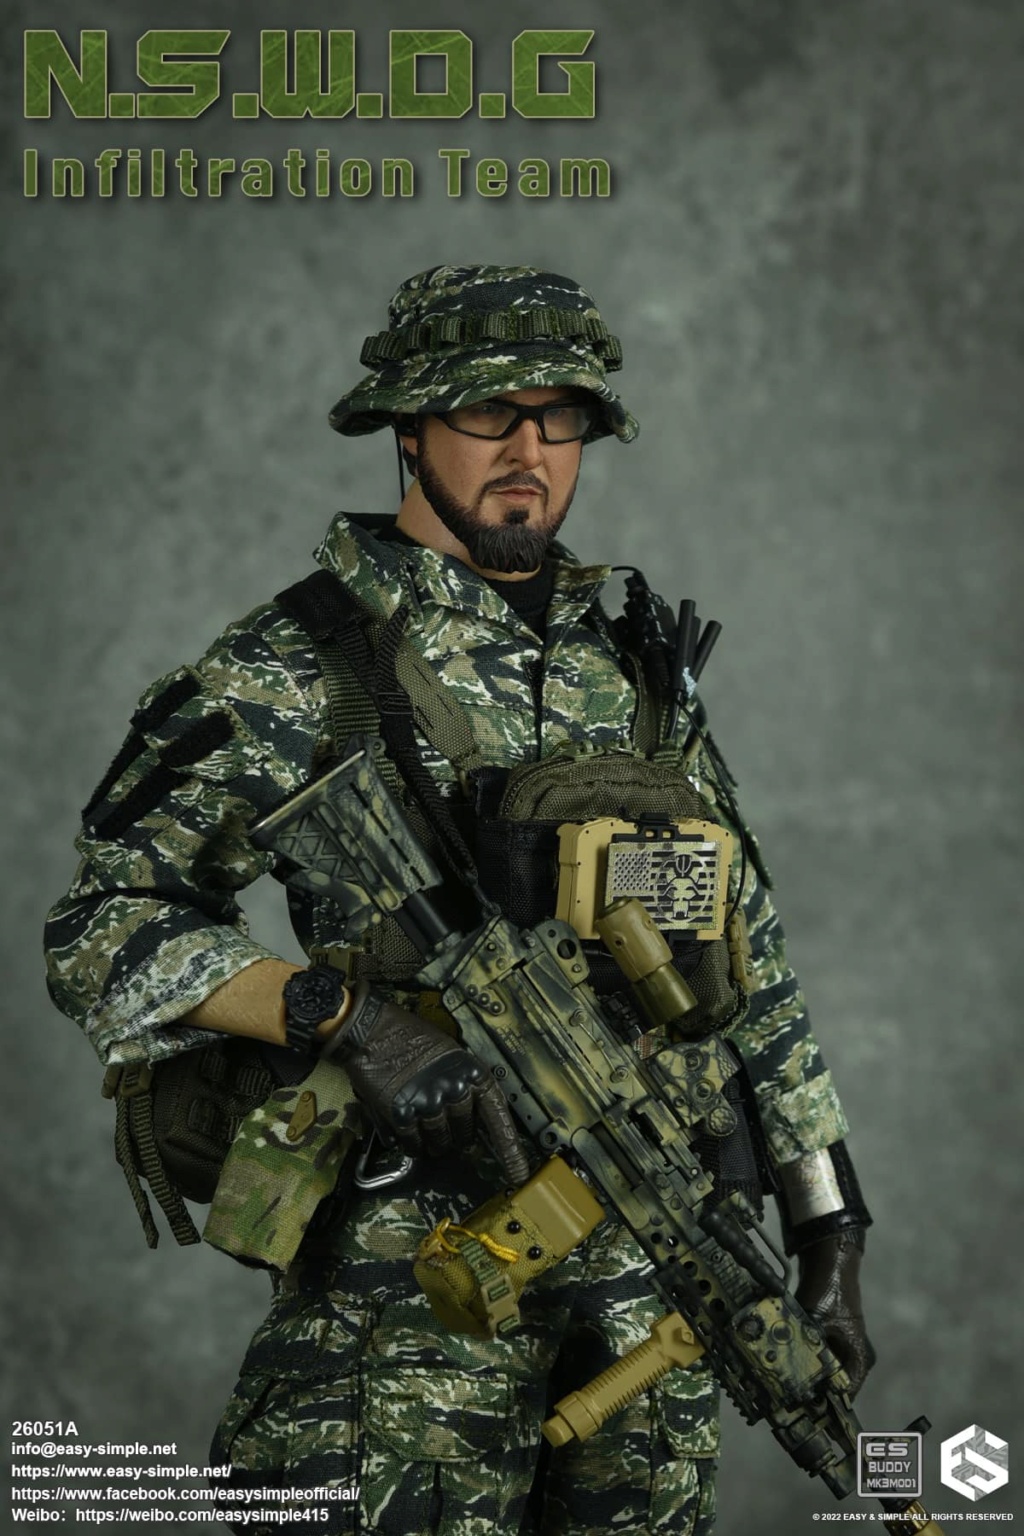 NSWDG - NEW PRODUCT: EASY AND SIMPLE 1/6 SCALE FIGURE: N.S.W.D.G INFILTRATION TEAM - (2 Versions) 16371